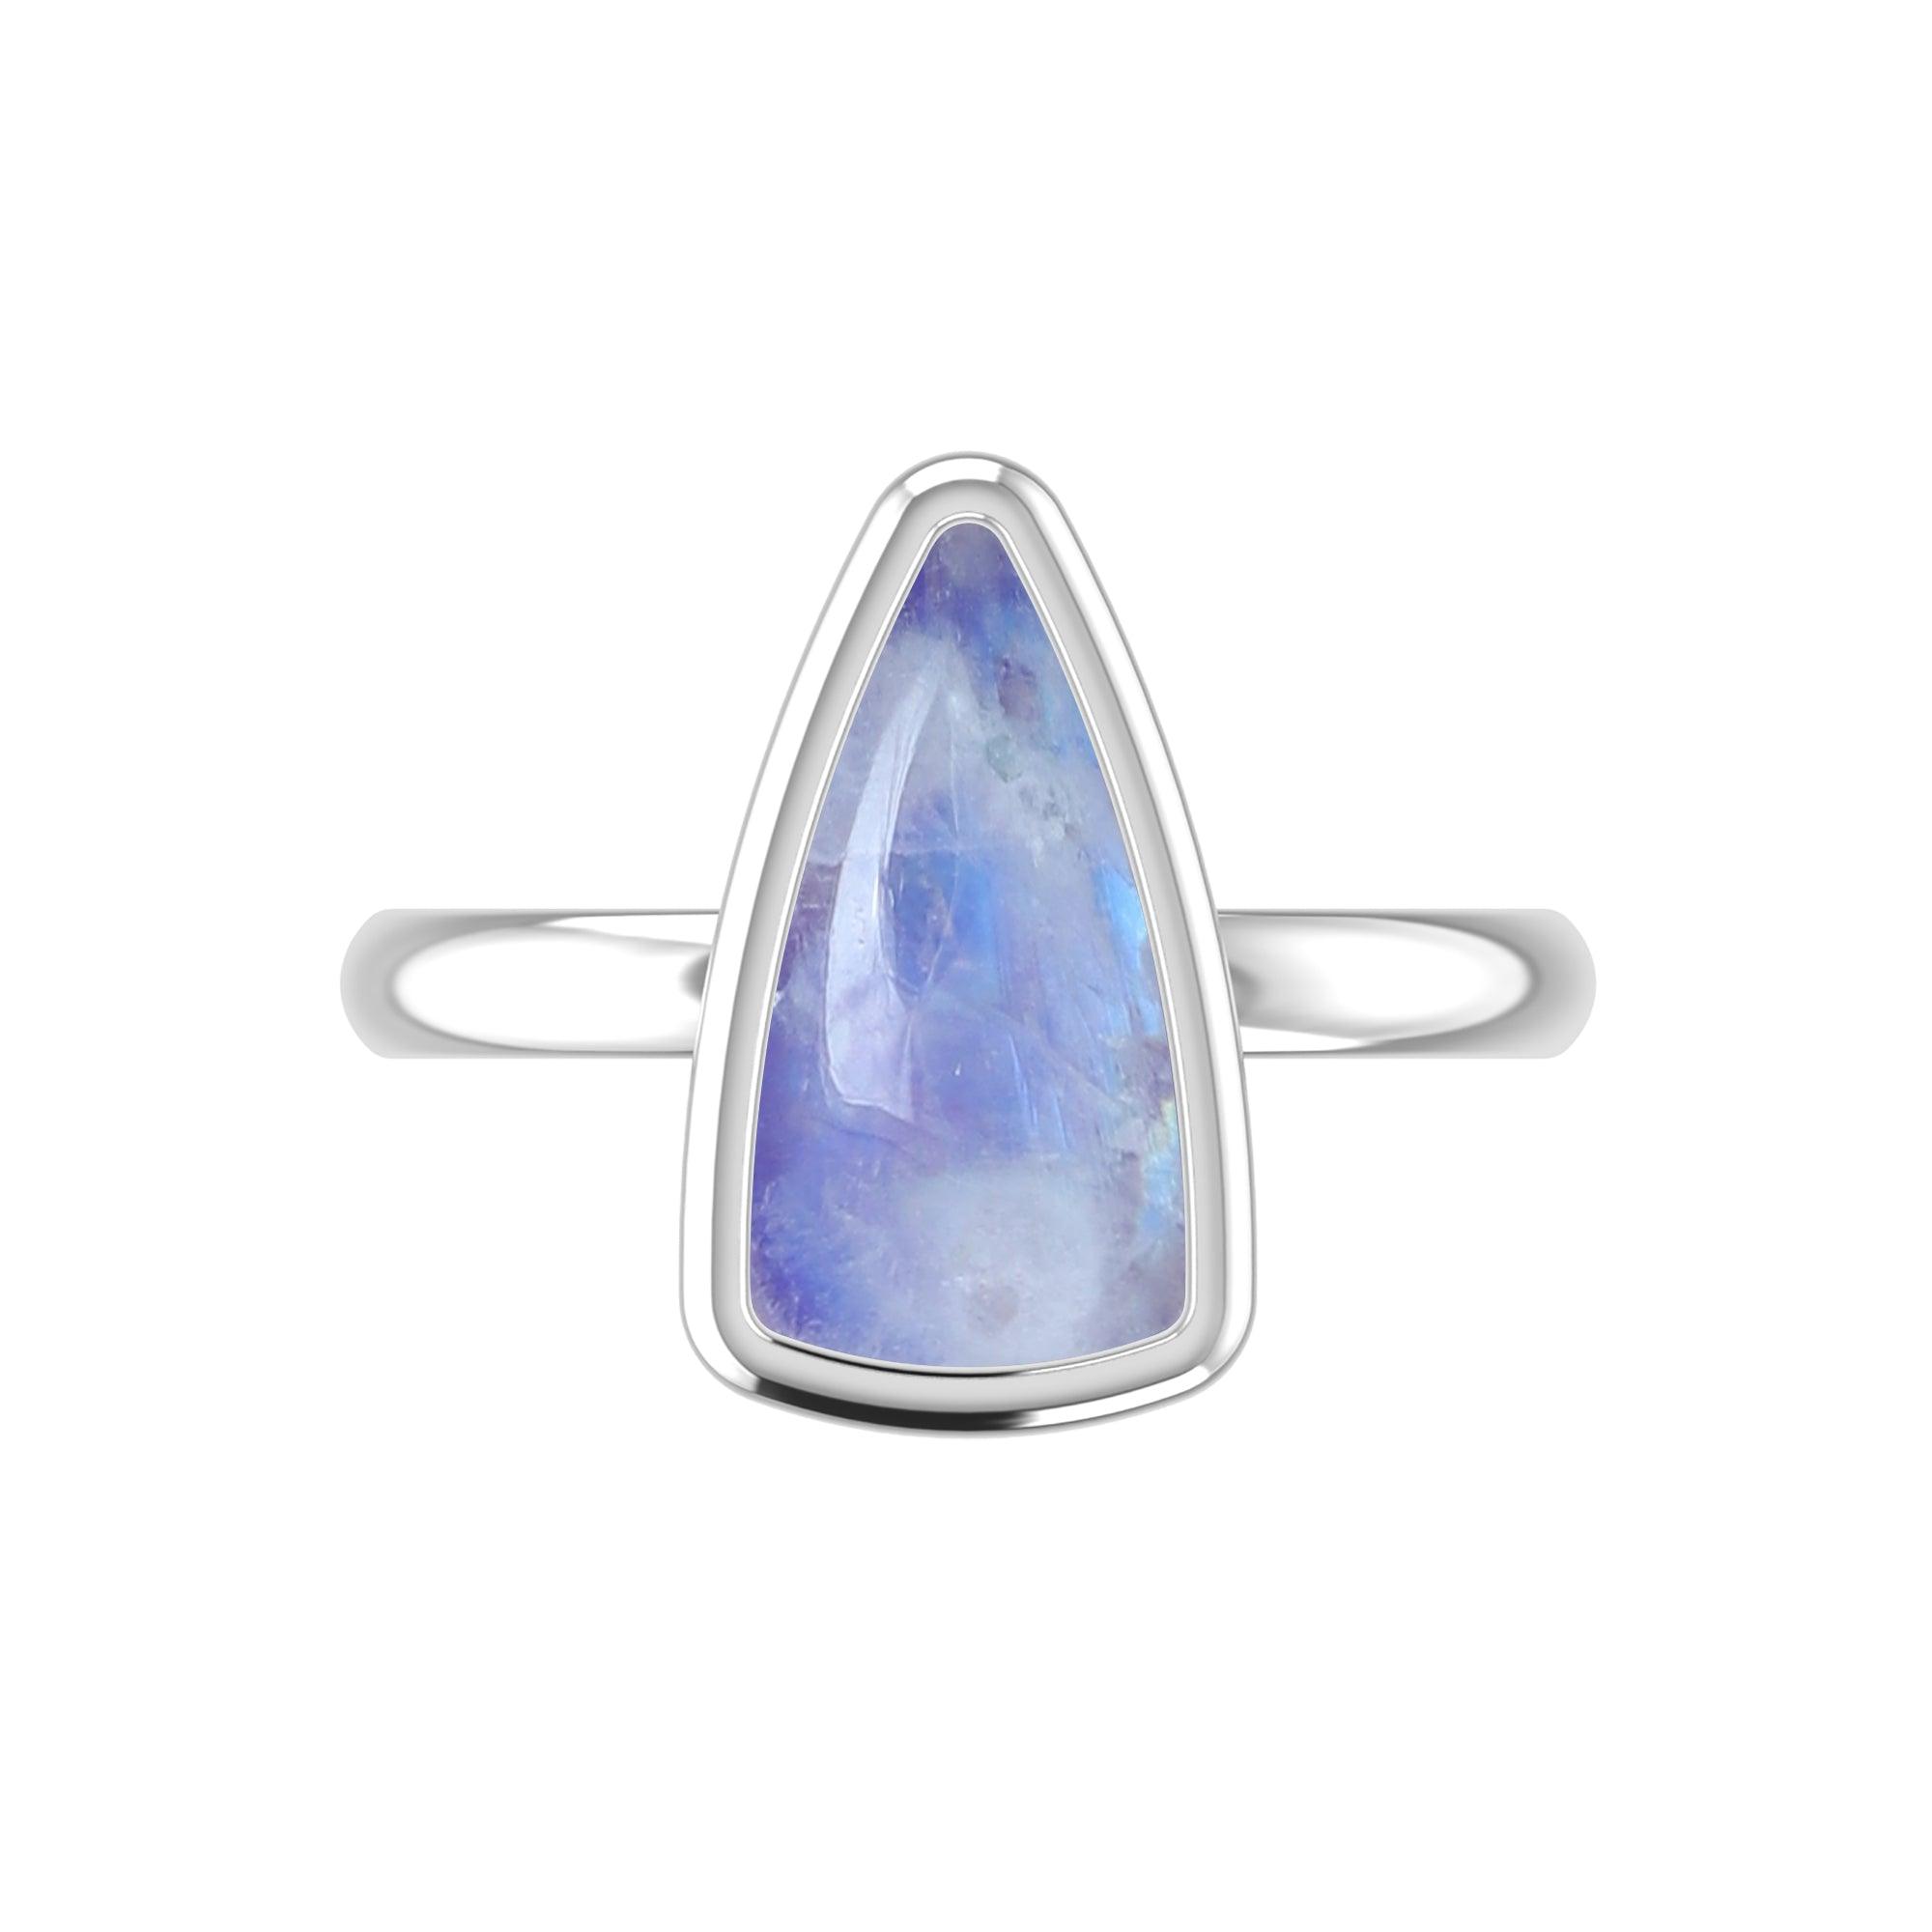 Natural Purple Moonstone Ring 925 Sterling Silver Bezel Set Handmade Jewelry Pack of 6 - (Box 4)